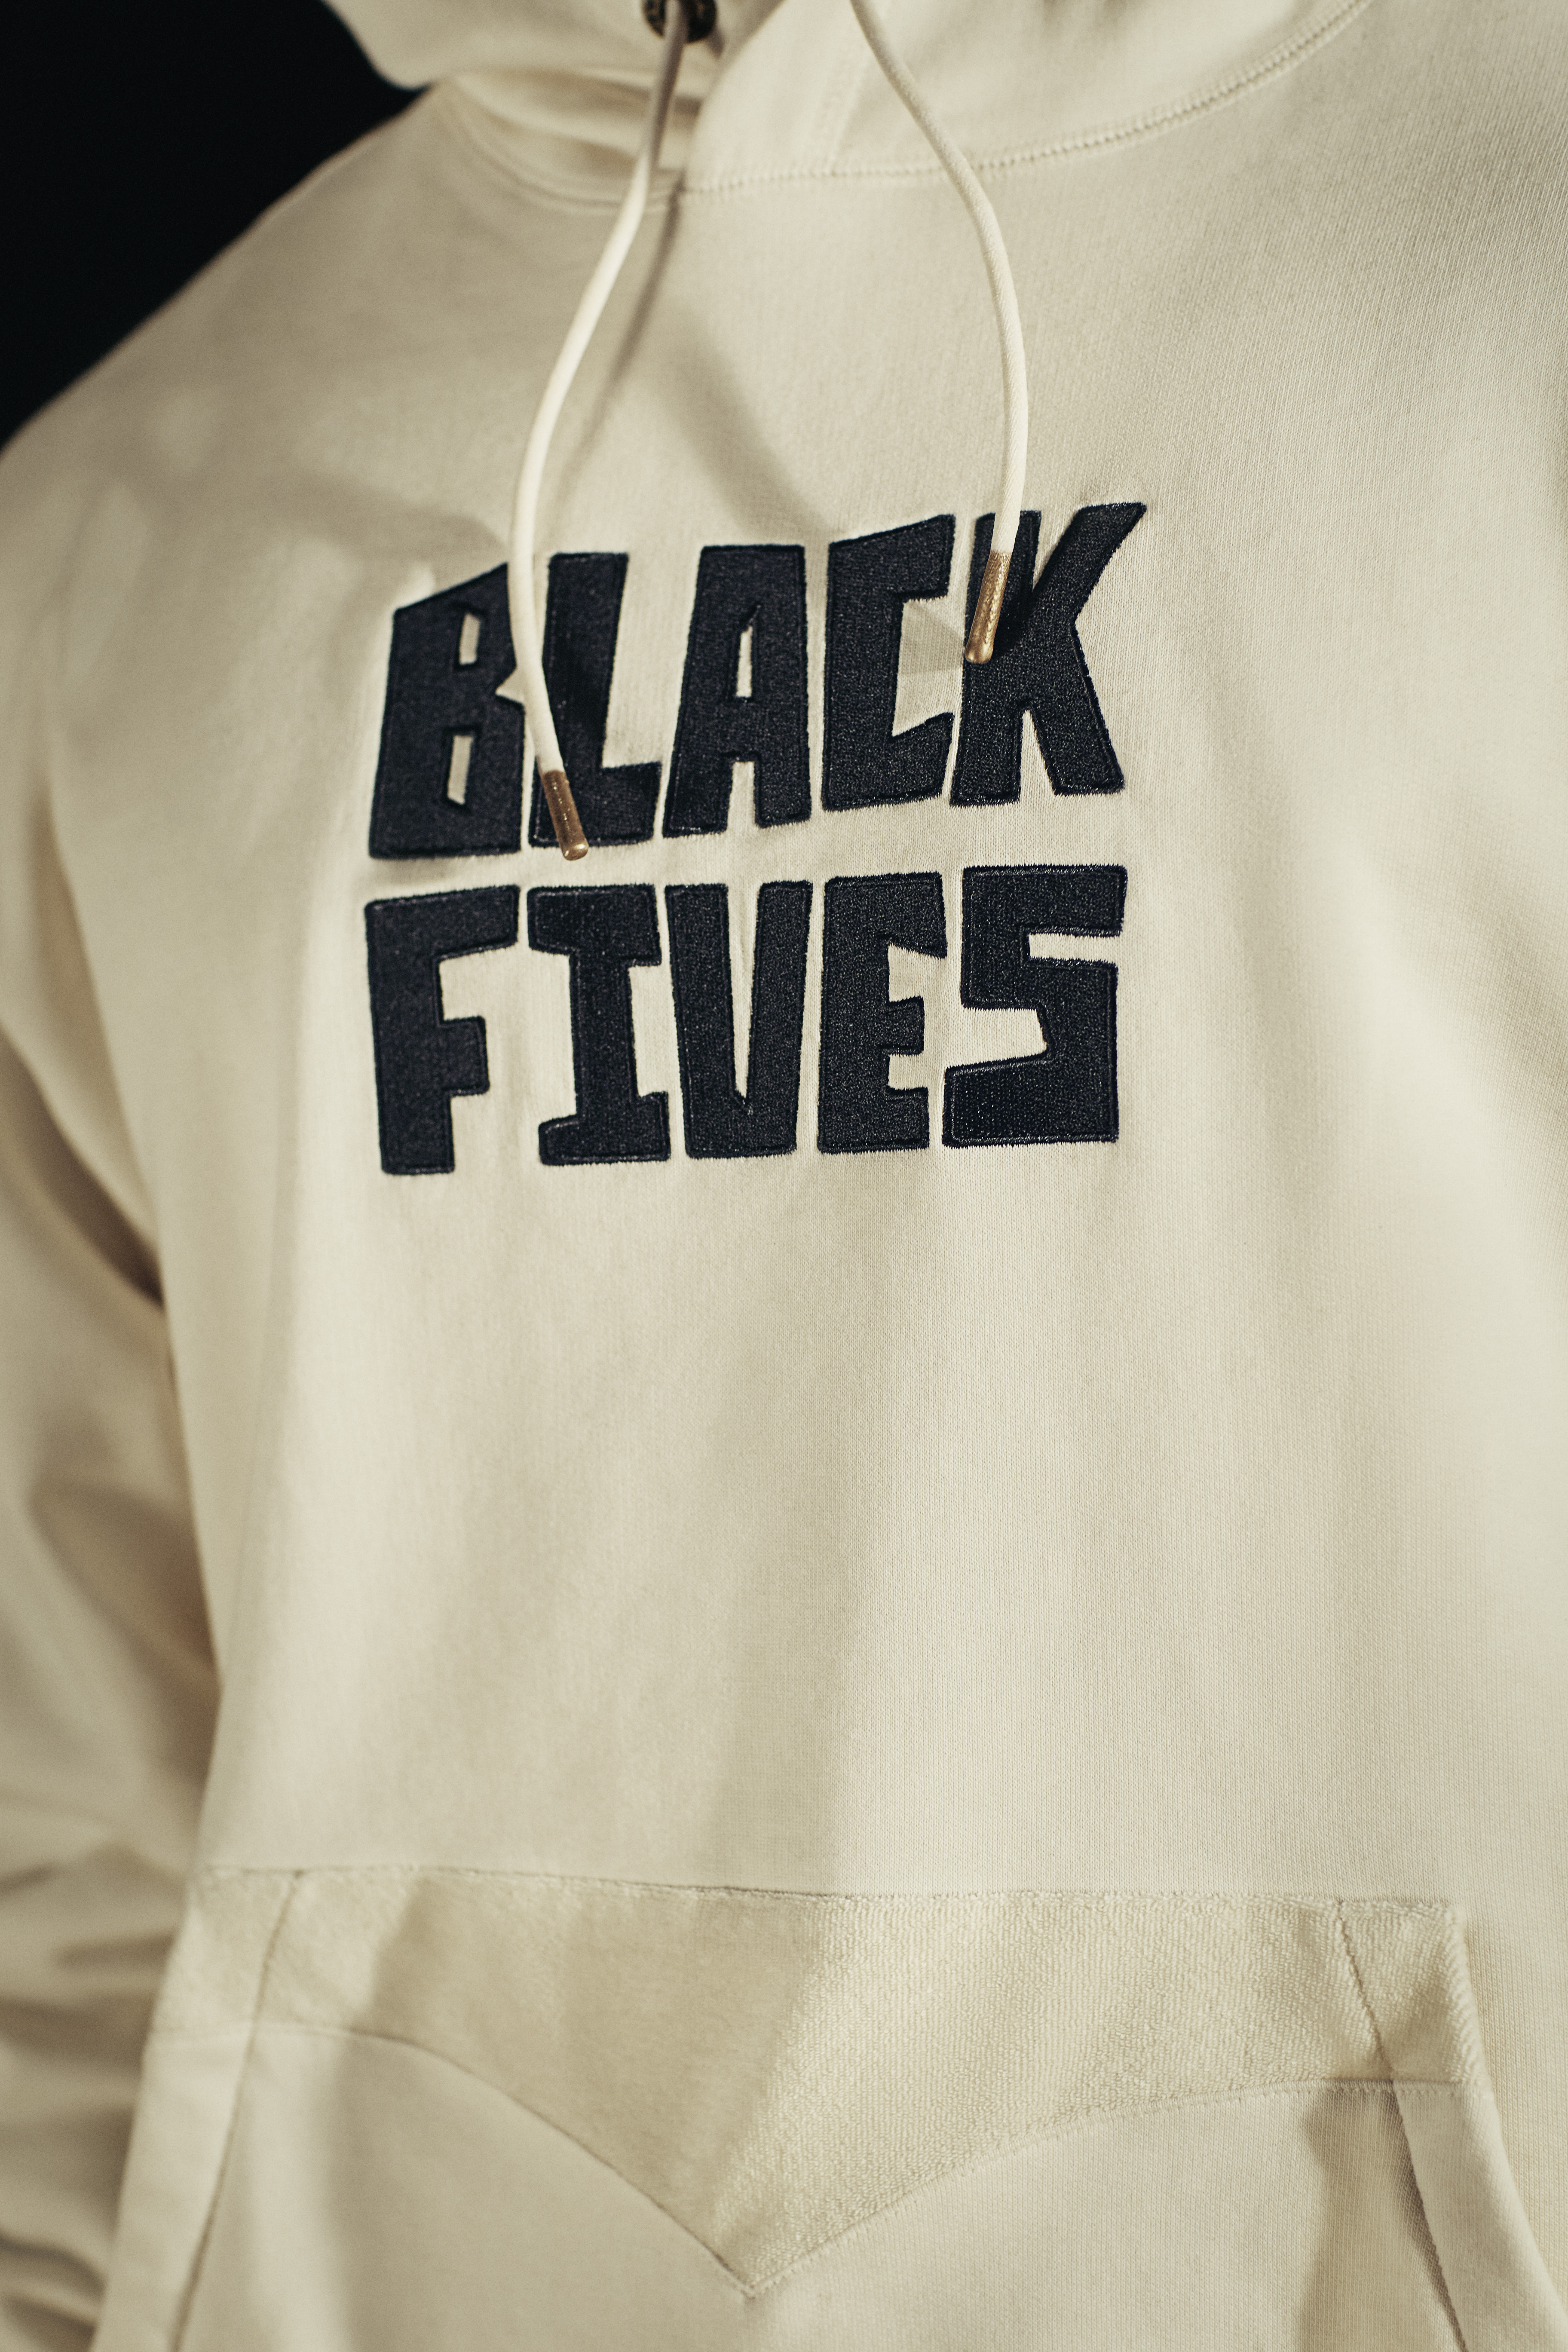 PUMA Announces Multi-Year Partnership With The Black Fives Foundation